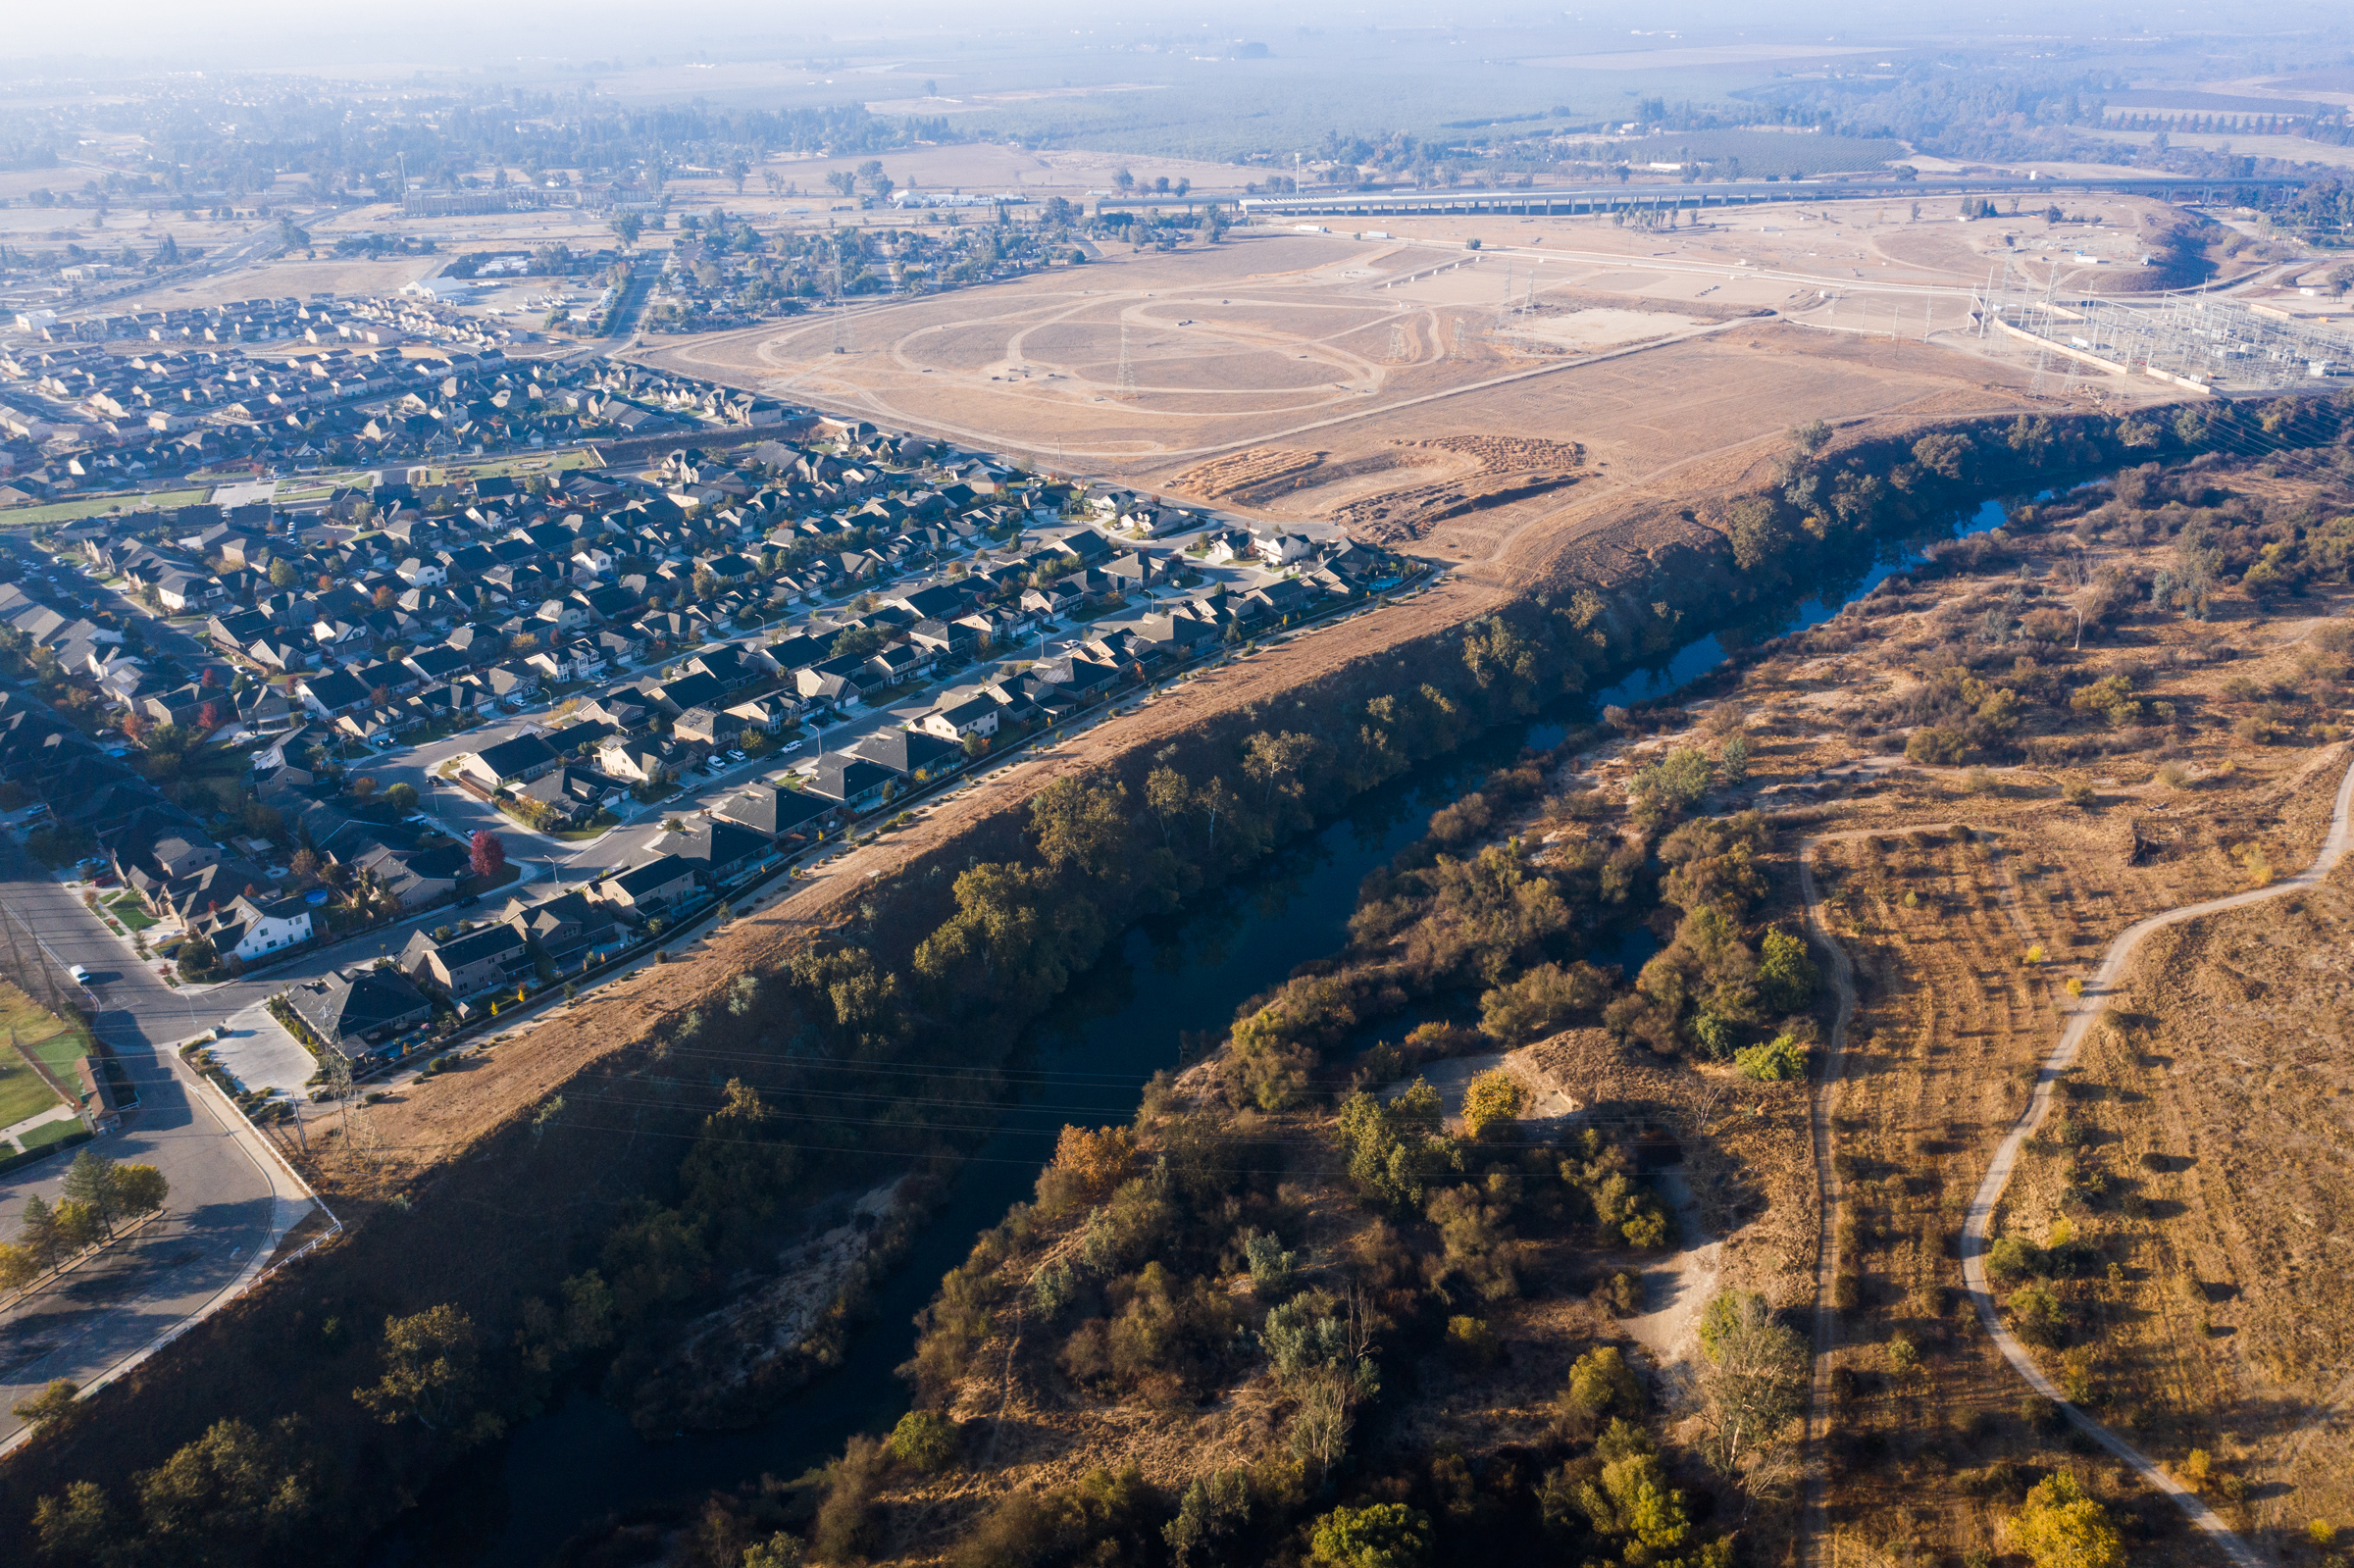 Fresno housing developments crowd the southern edge of the San Joaquin River